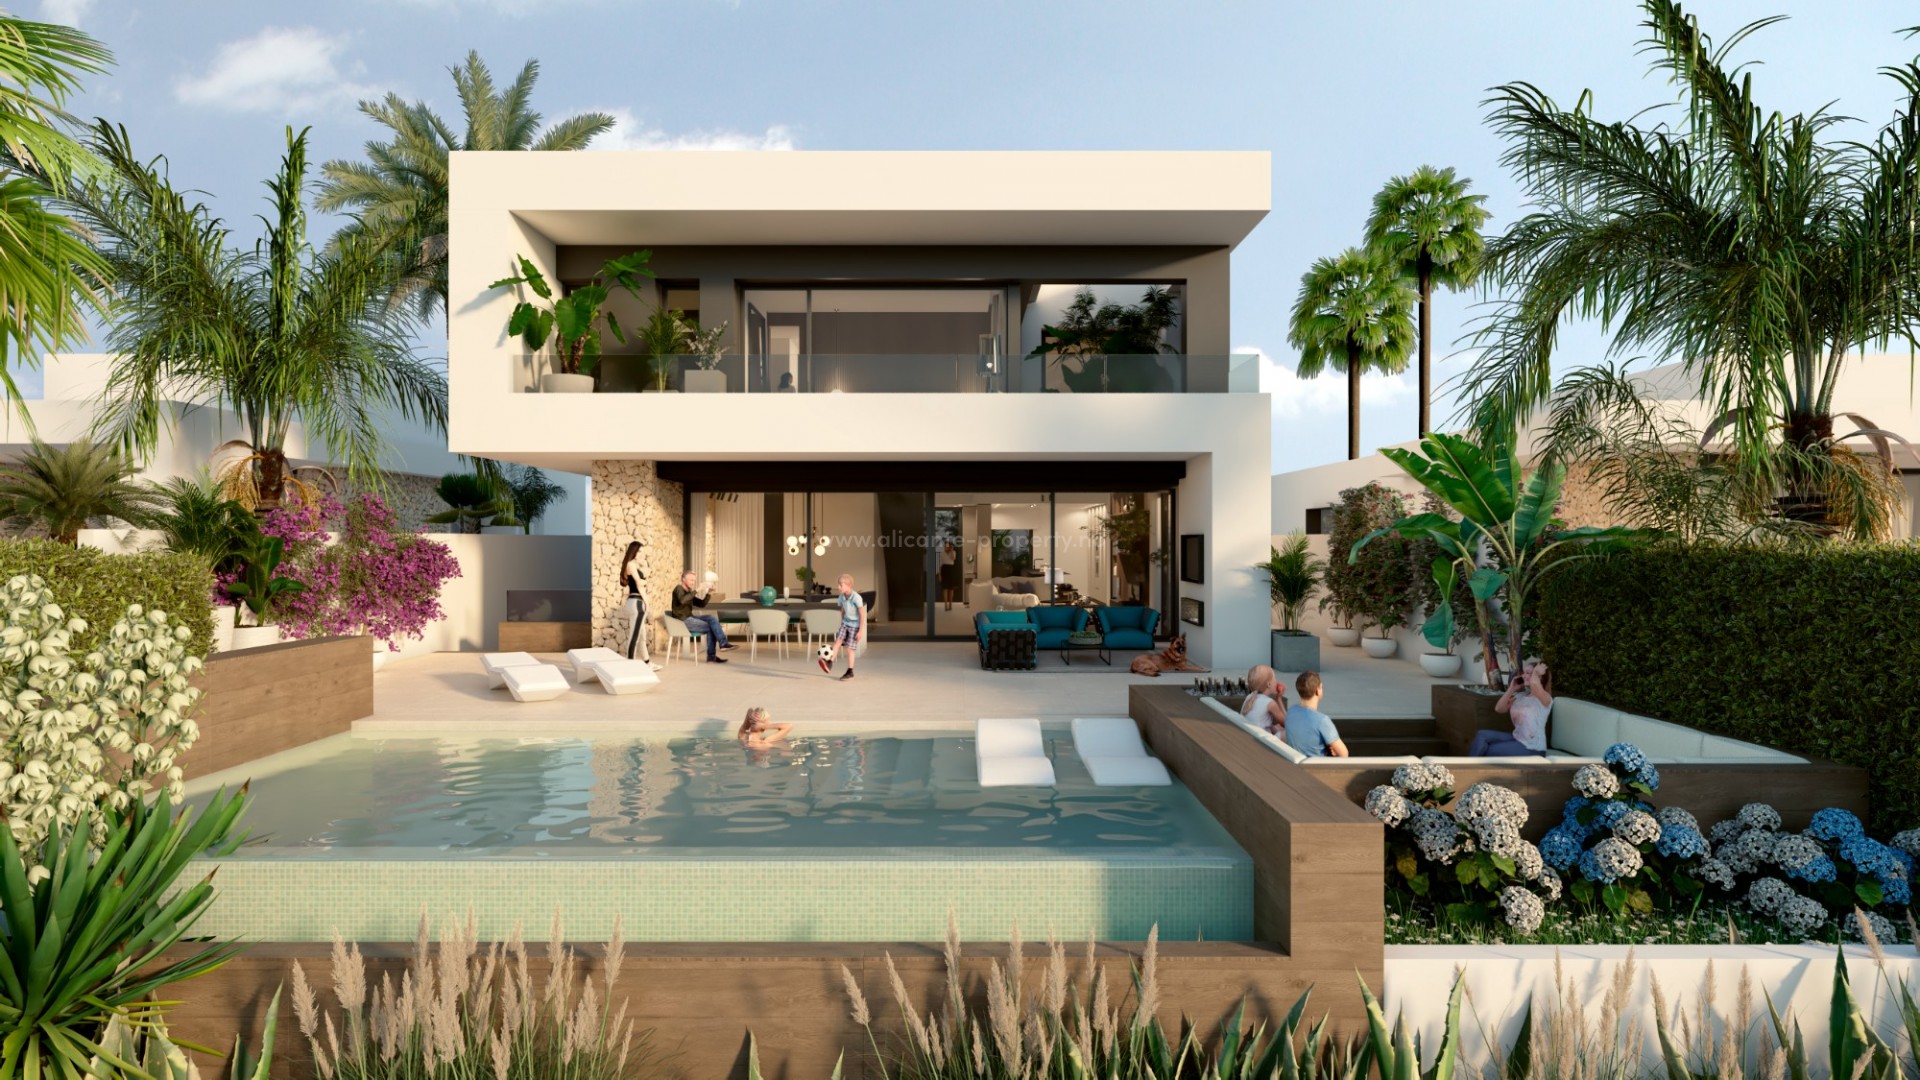 The luxurious frontline golf villas at La Finca Golf Resort, 3 bedrooms, 2 bathrooms, infinity pool, underground parking, large garden and a fantastic view